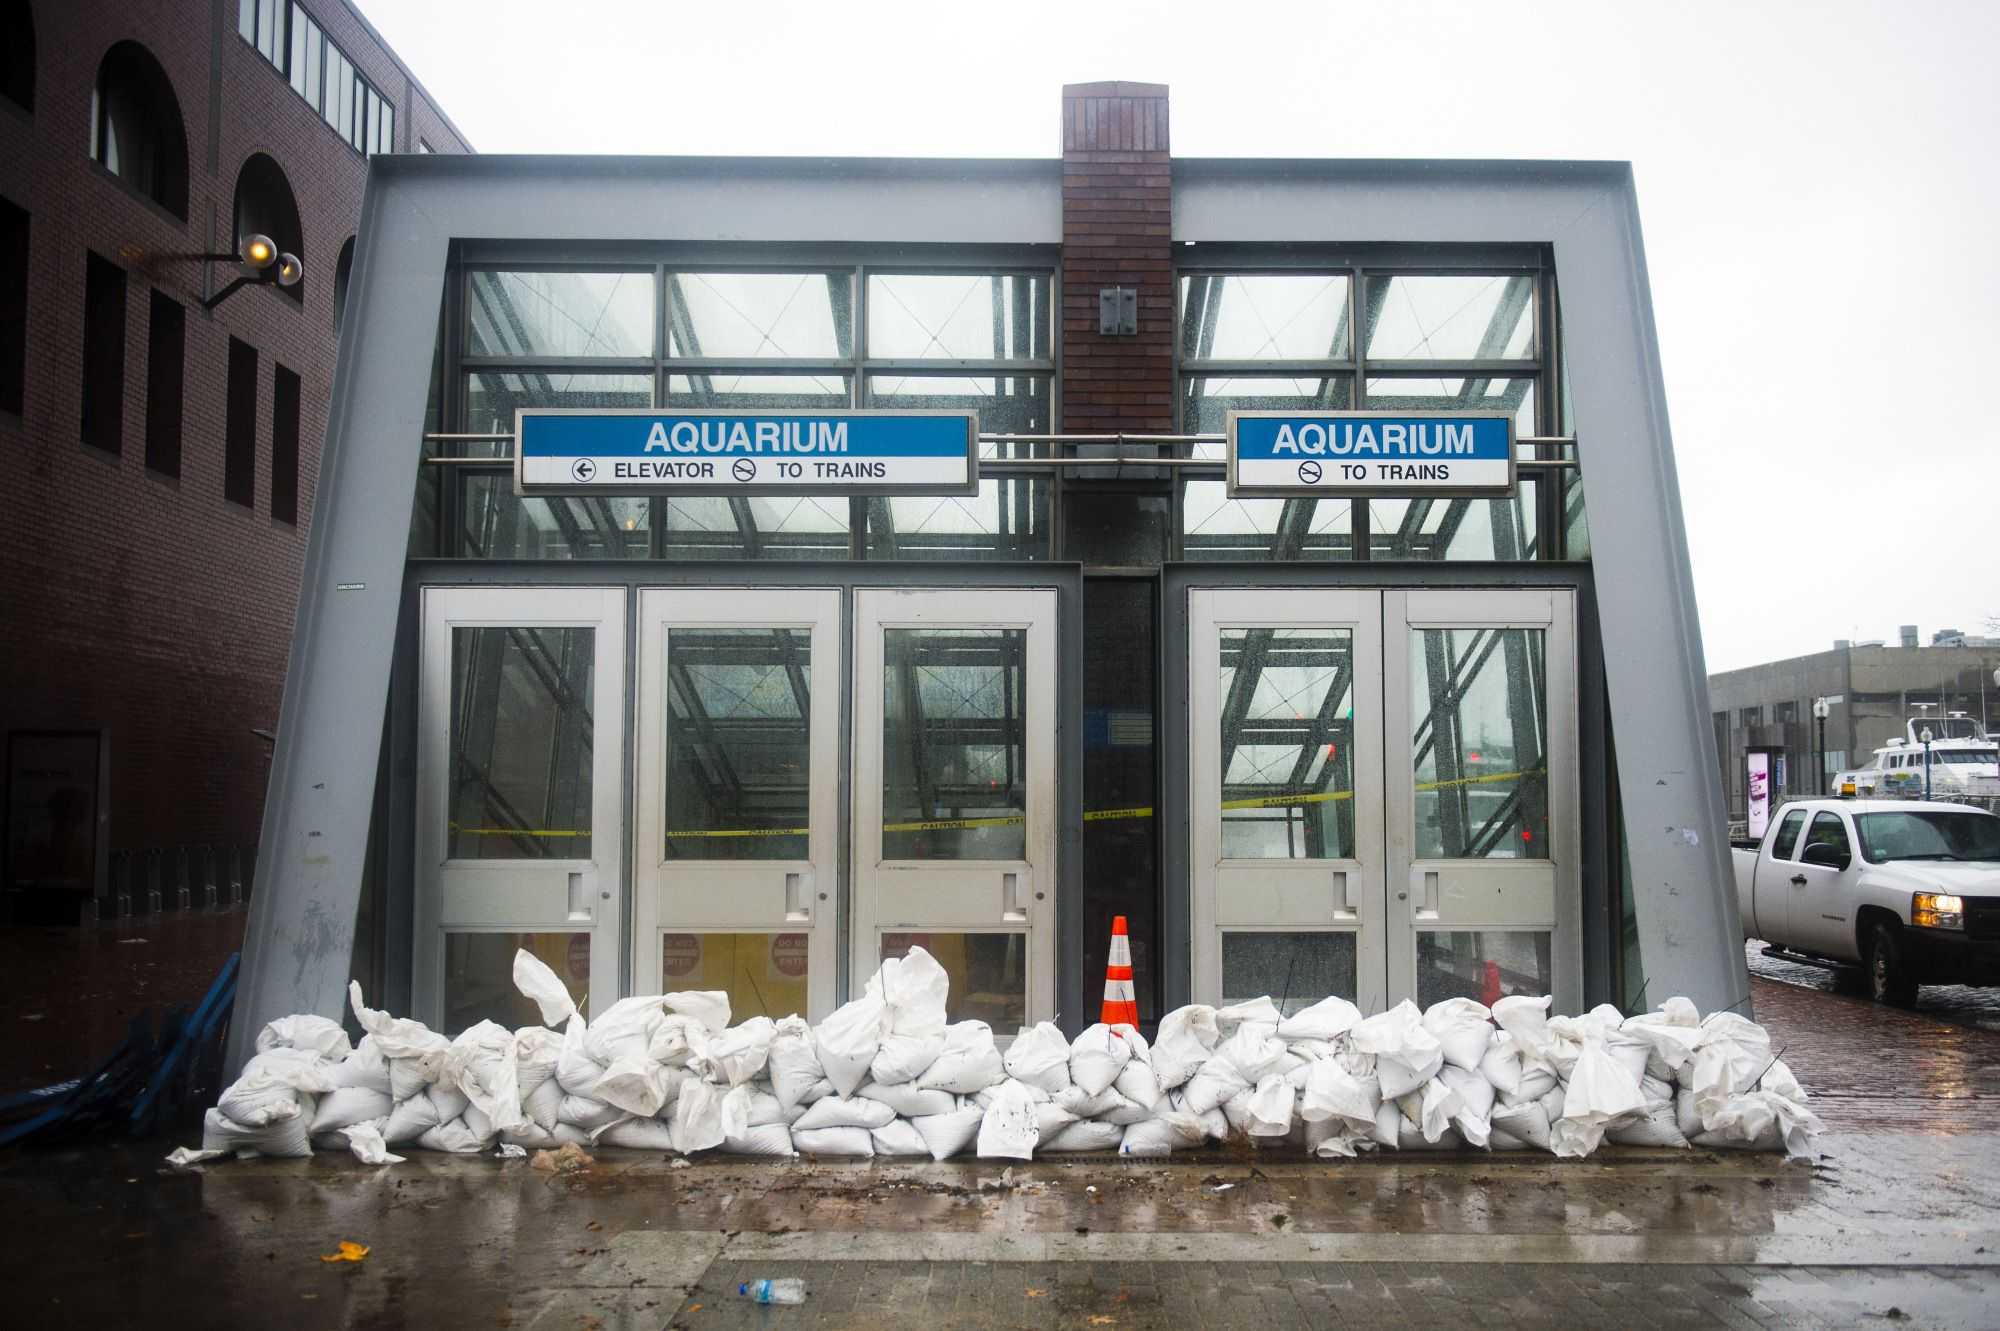 Sandbags lined the entrance to the Aquarium MBTA station during a storm in March 2018.